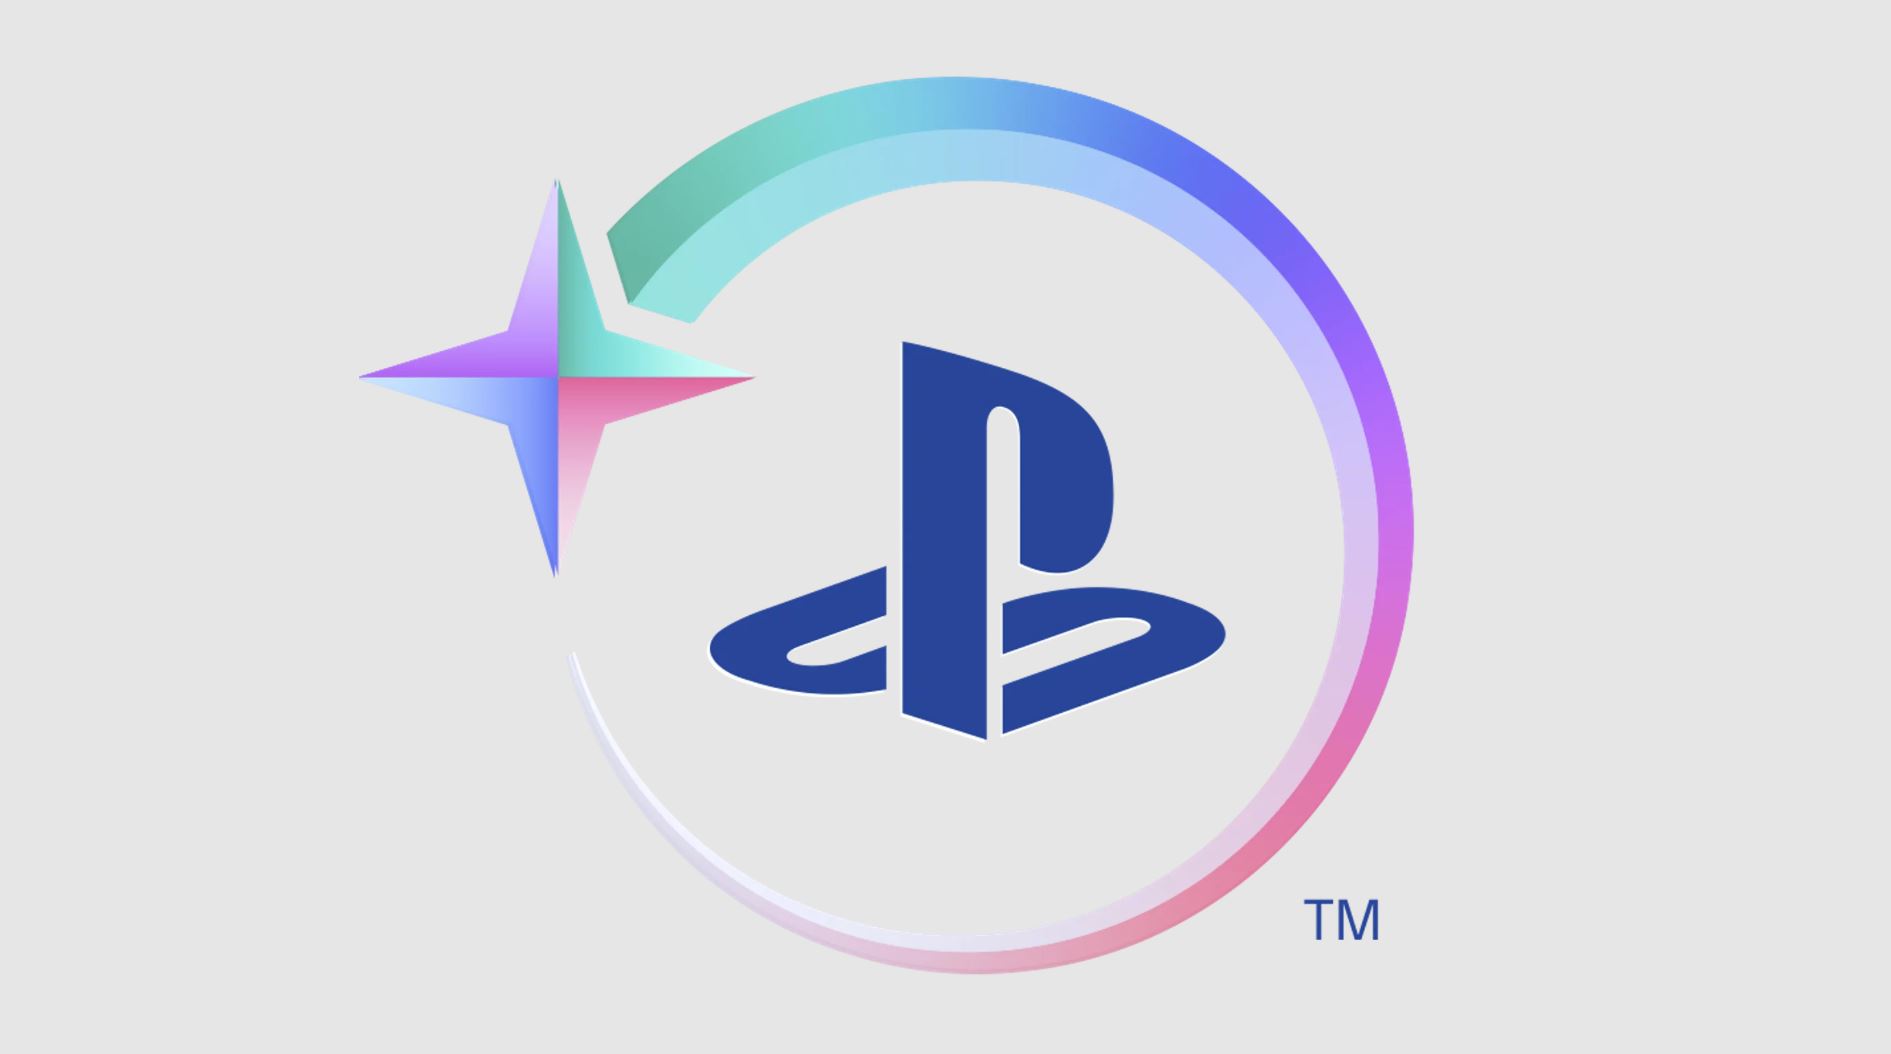 Is PlayStation Stars Free?: Do I Have To Pay for PS Stars